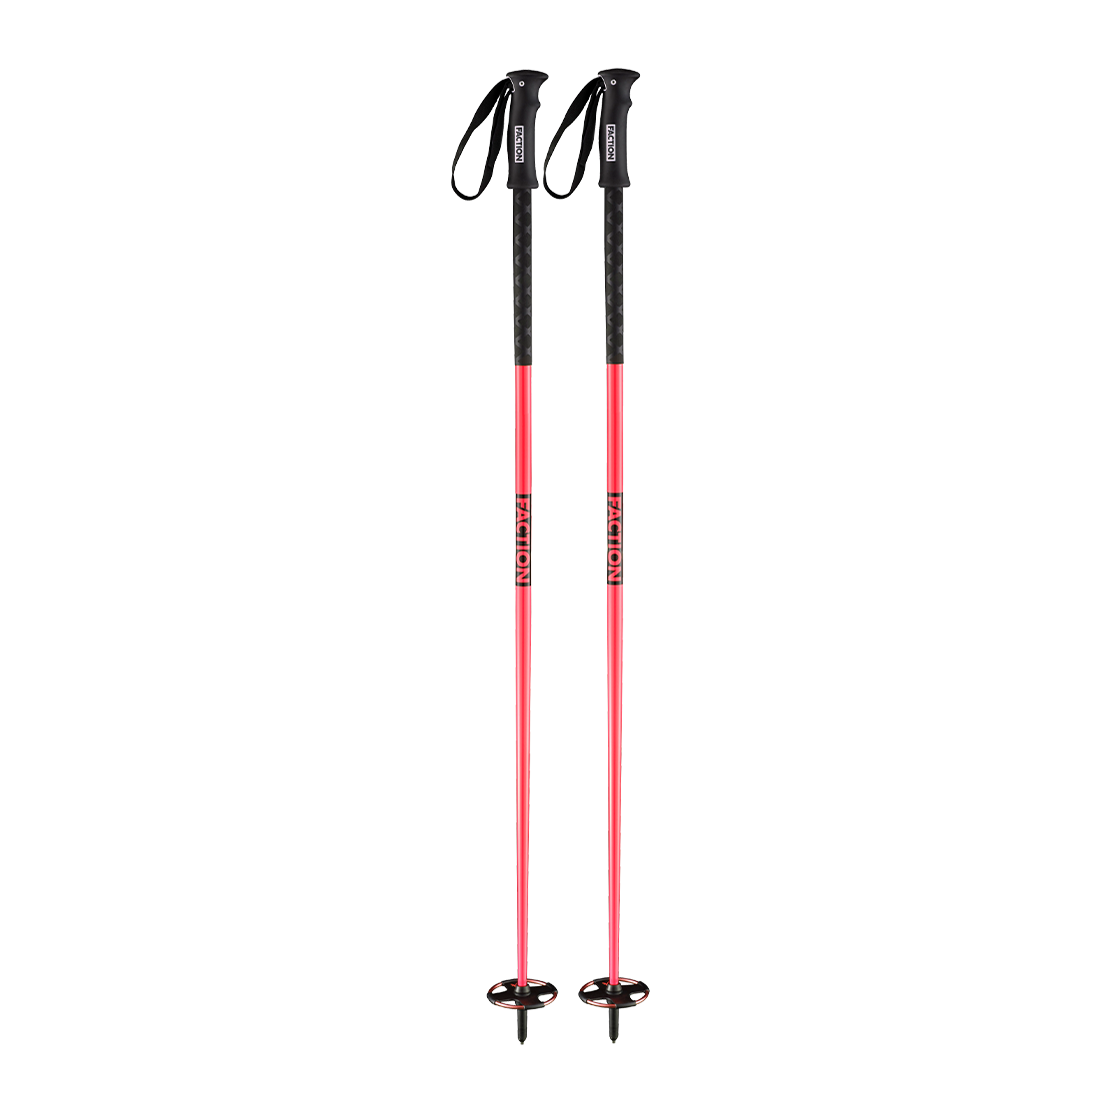 Faction Skis Red Poles